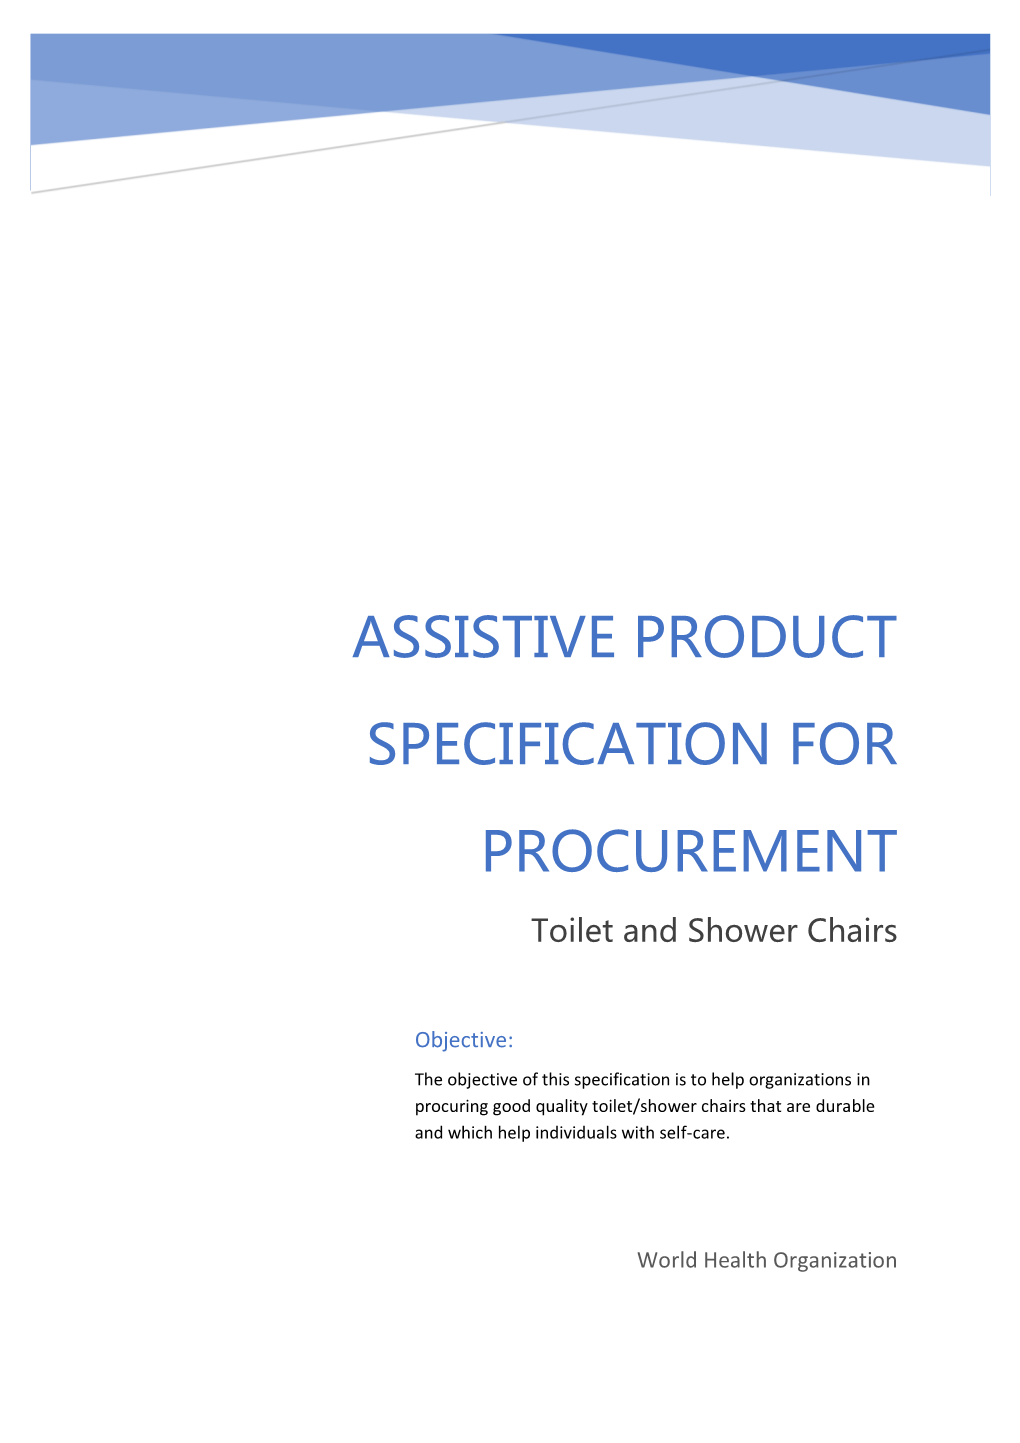 Assistive Product Specification for Procurement